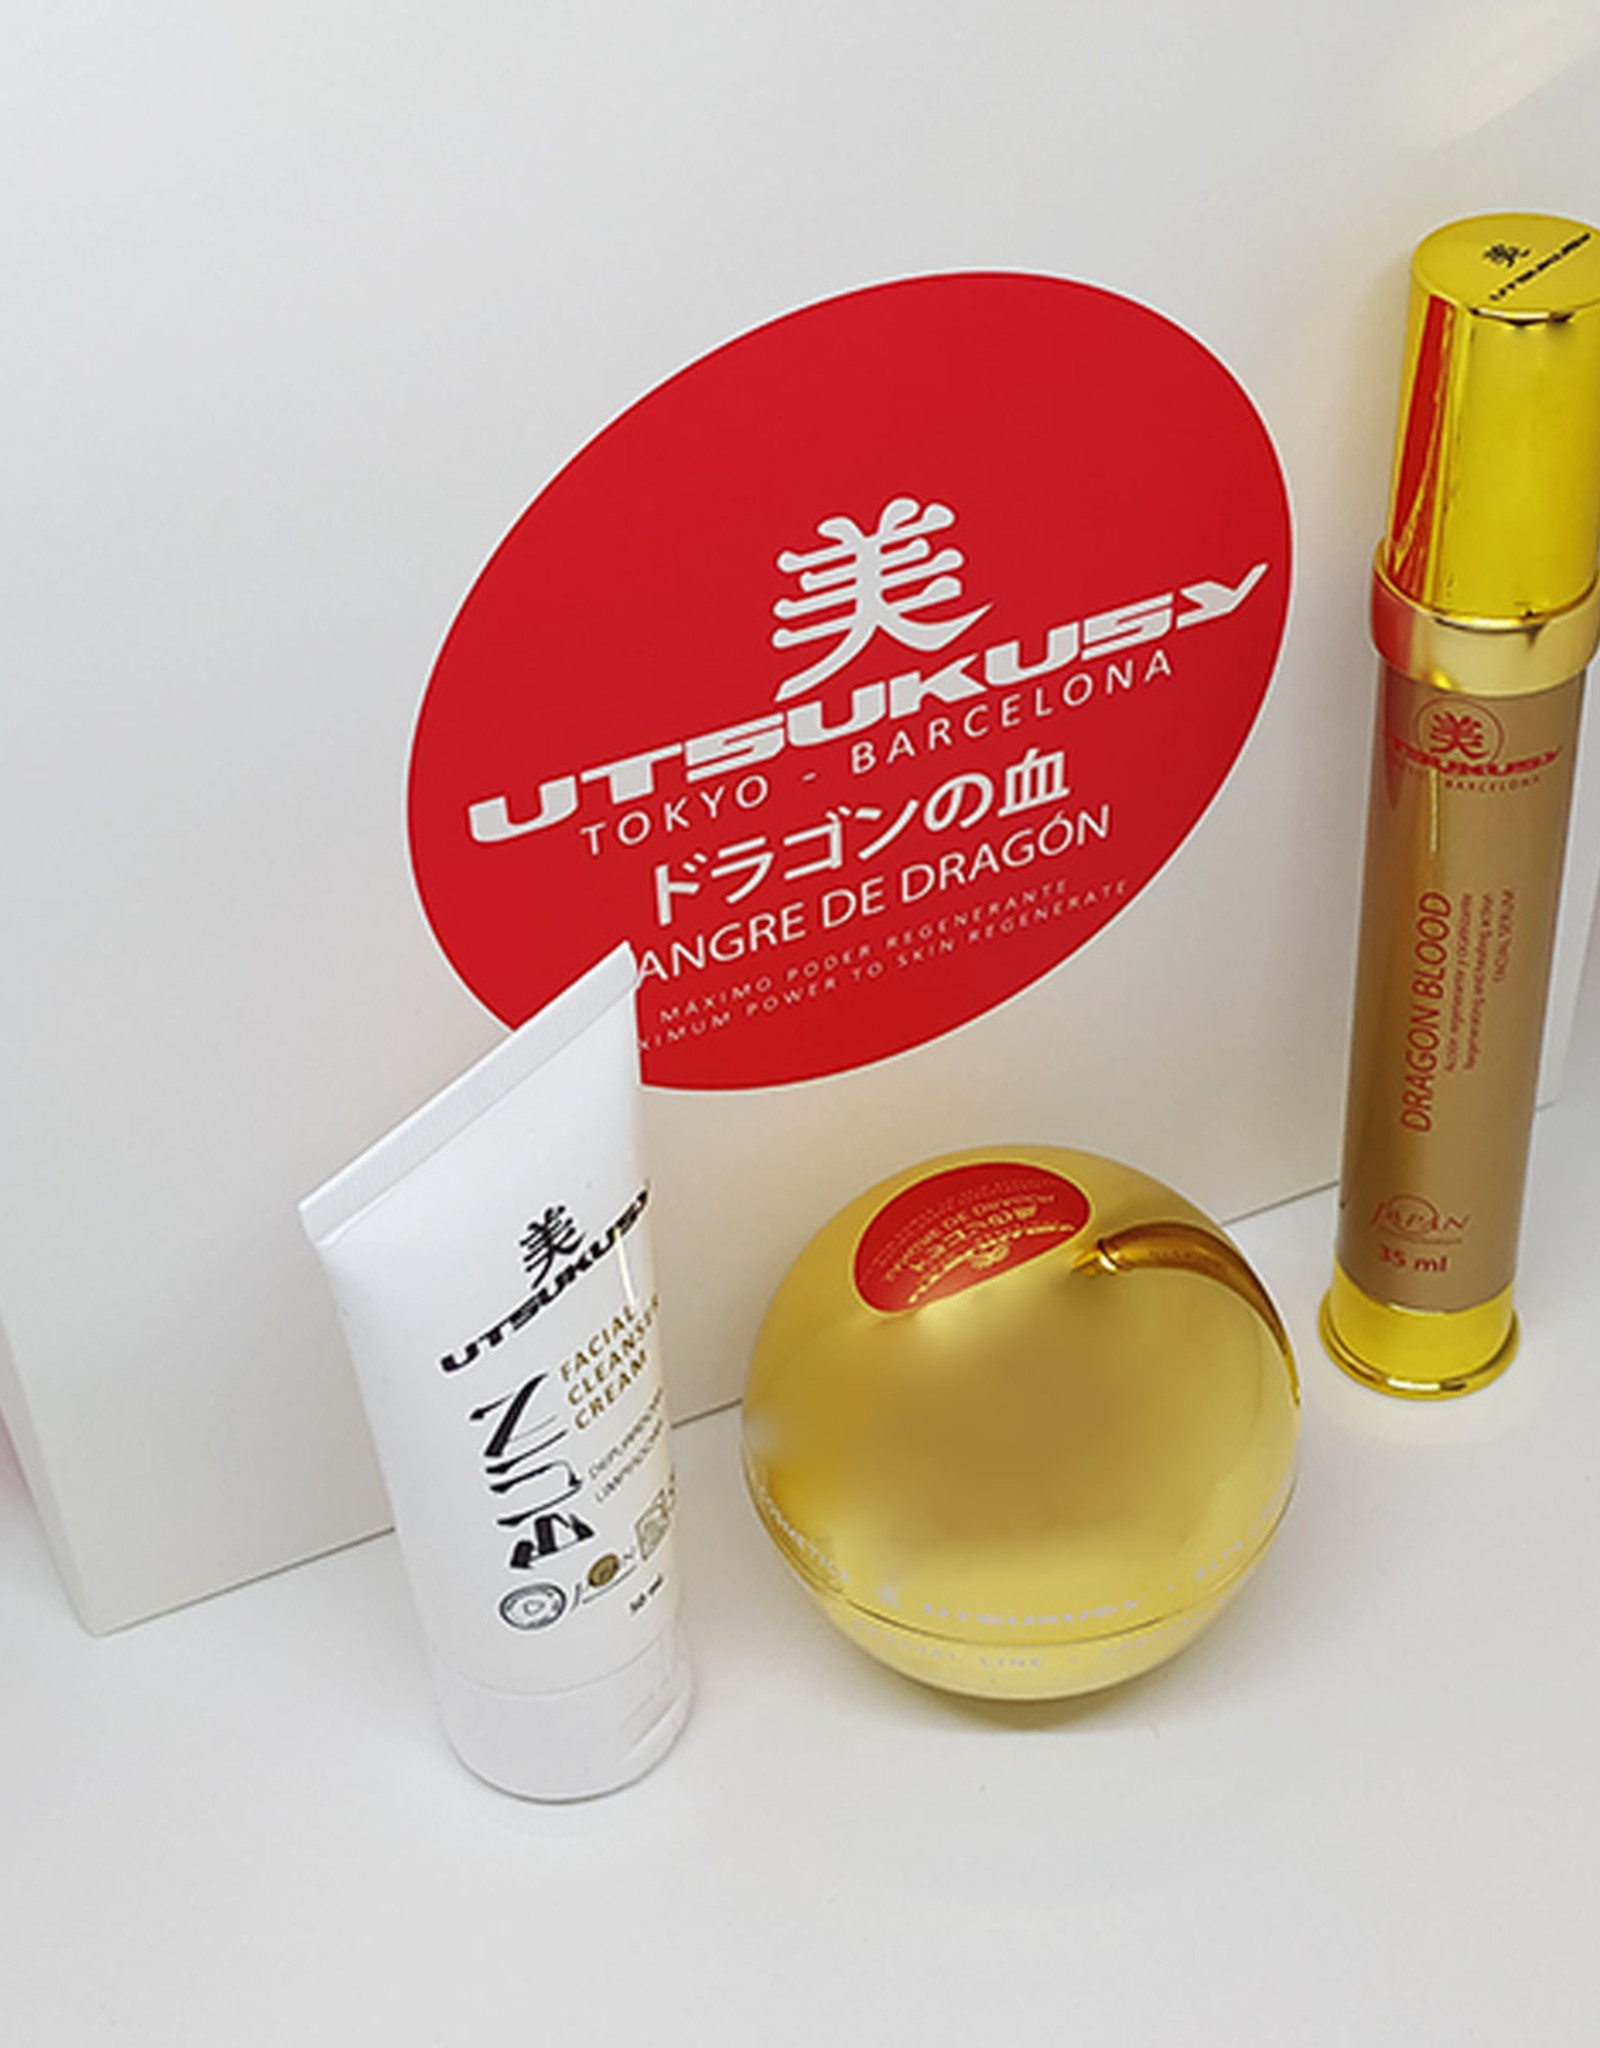 Utsukusy Dragon Blood home care kit